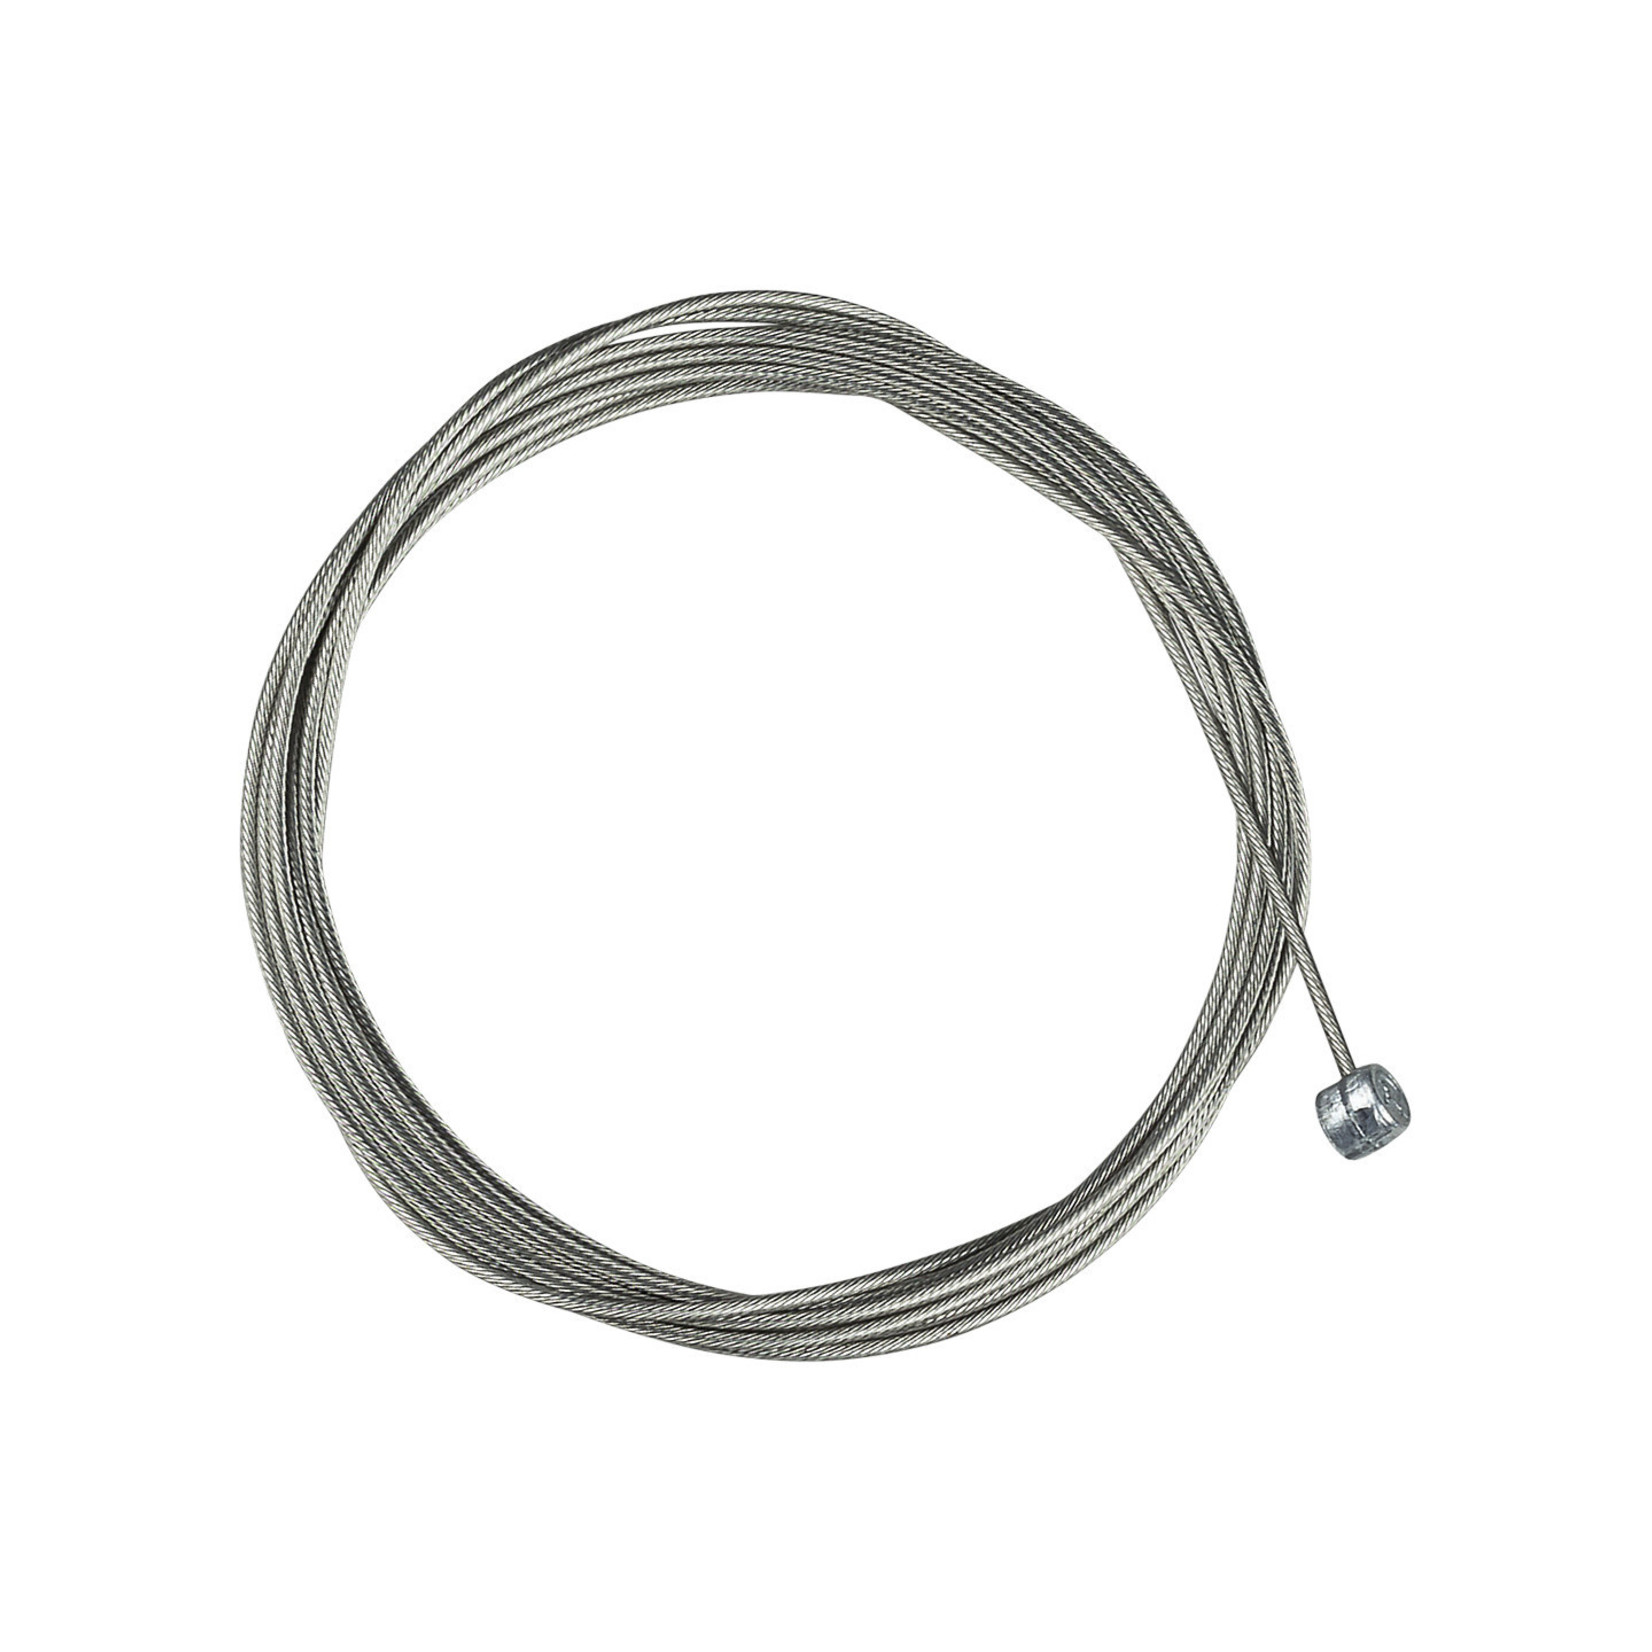 JAGWIRE Jagwire Slick Stainless MTB Brake Cable, 1.5mm x 2000mm